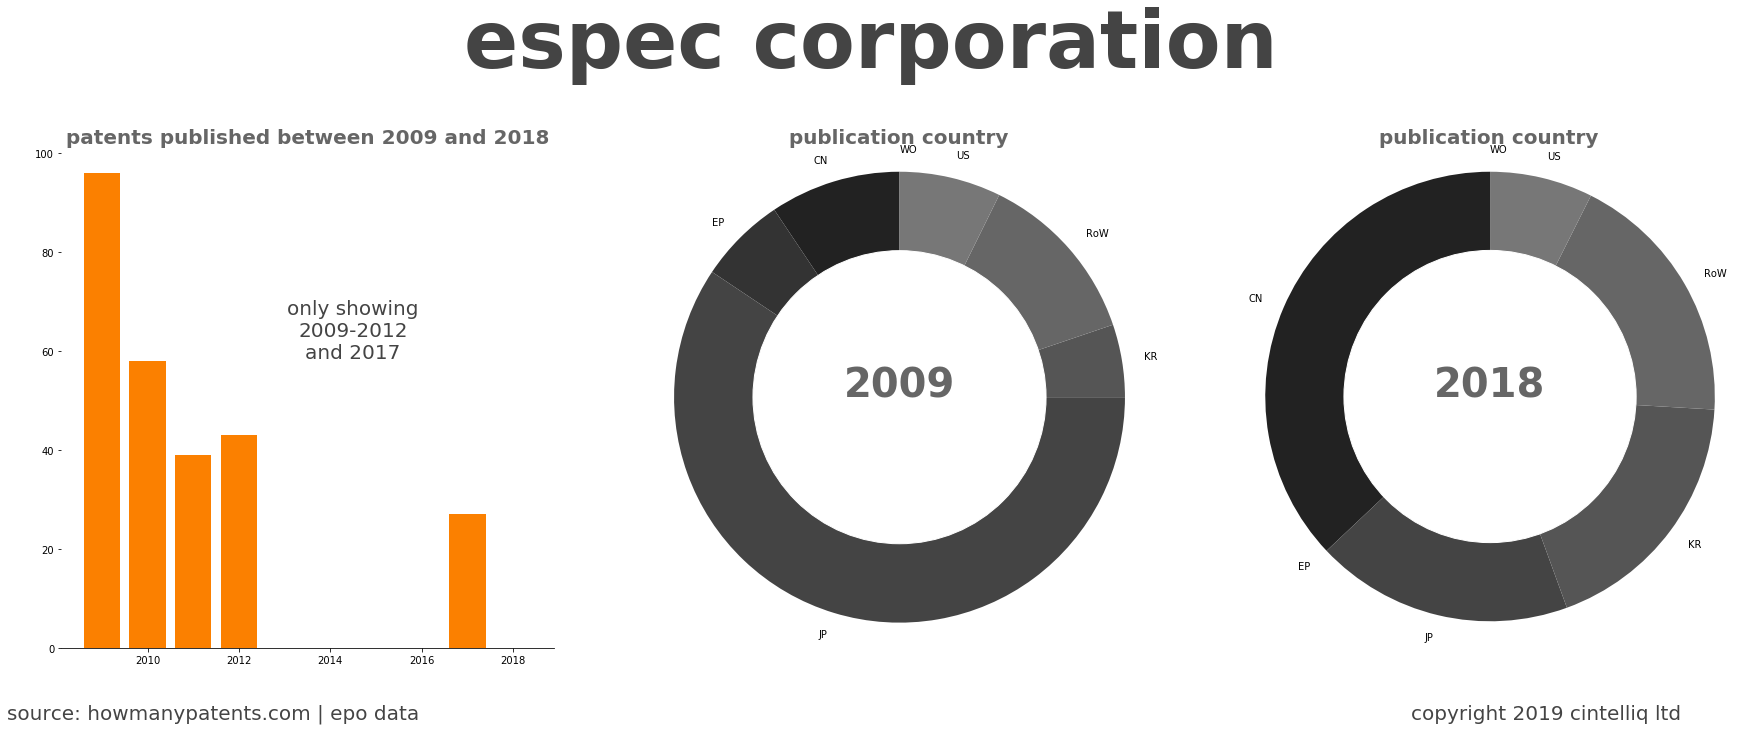 summary of patents for Espec Corporation